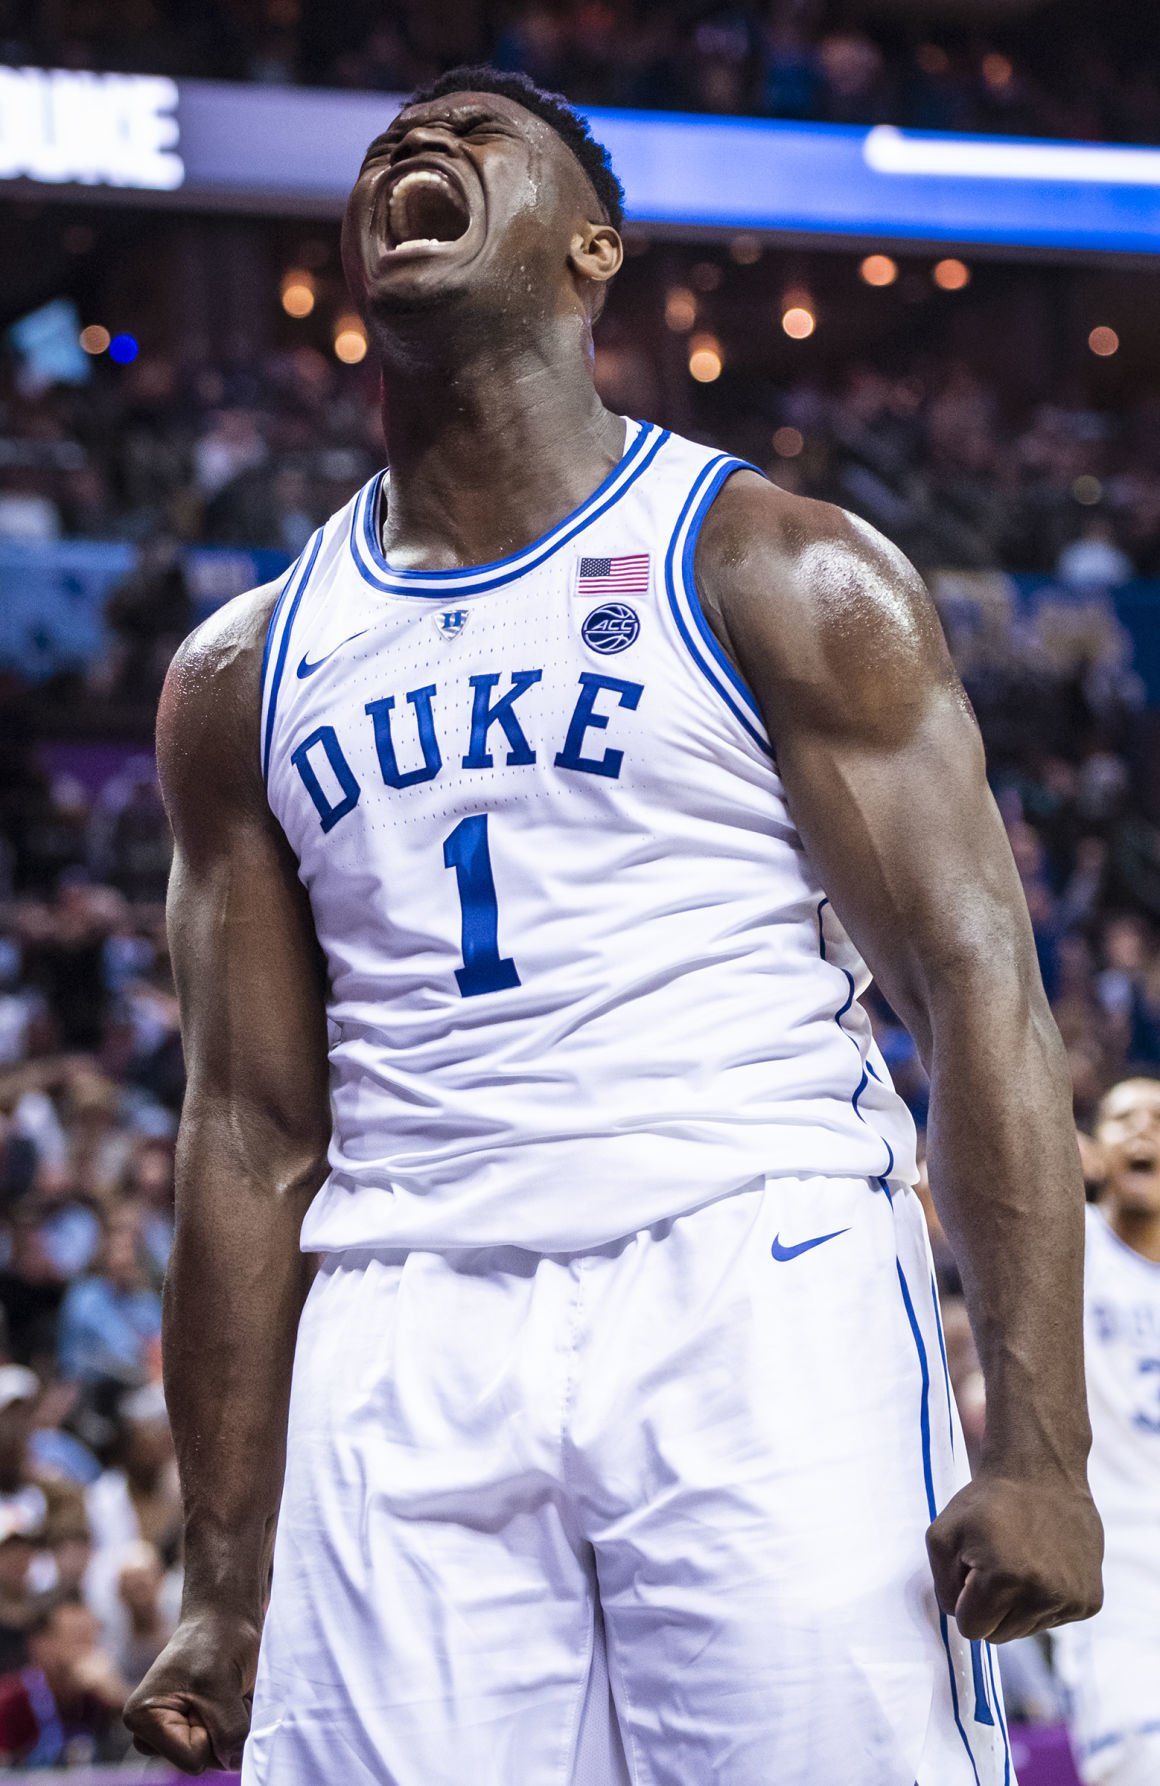 Ed Hardin NCAA Tournament is a new stage for Duke's Zion Williamson